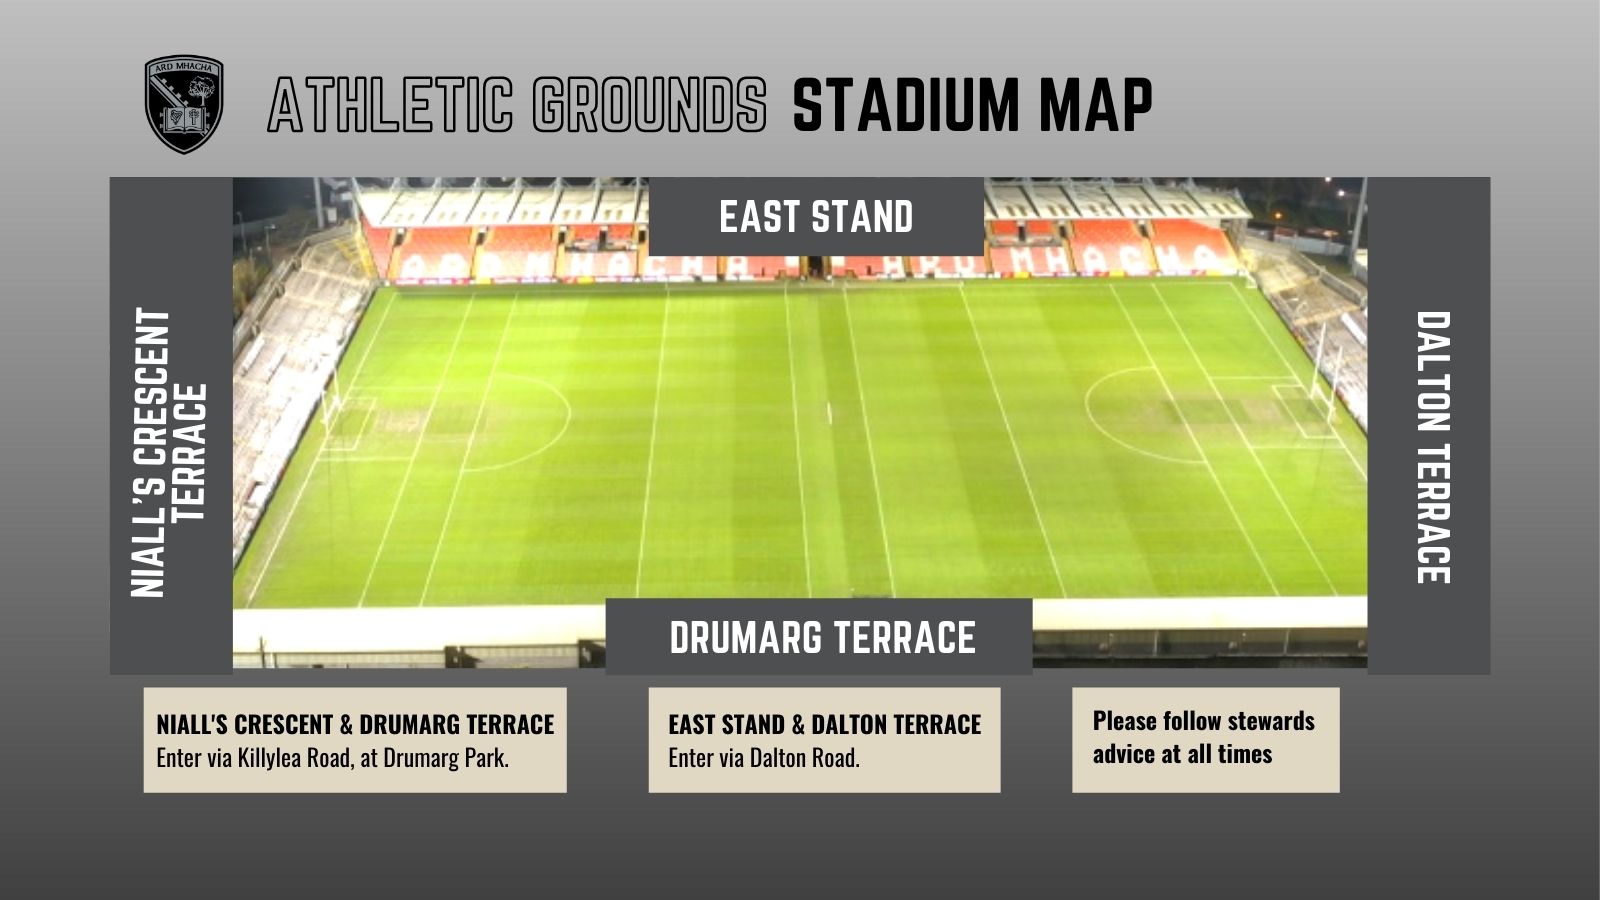 Spectator information for attending the Athletic Grounds